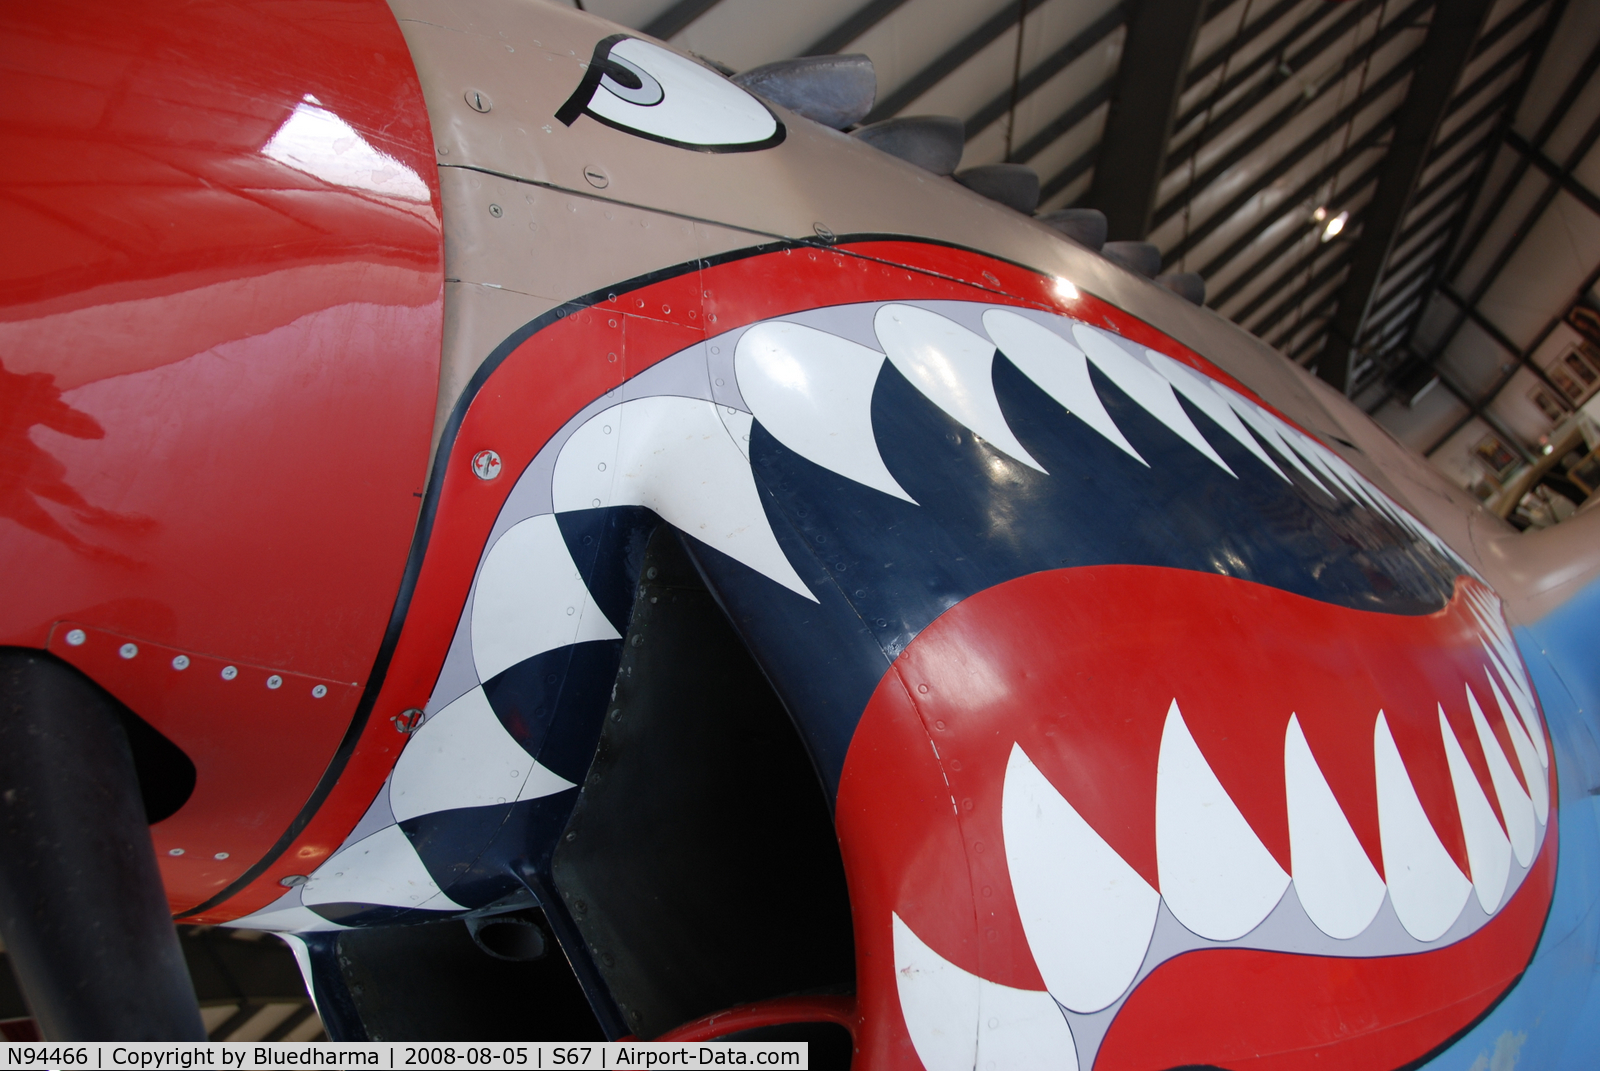 N94466, 1942 Curtiss P-40E C/N AK-899, Flying Tiger Front view. On display at the Warhawk Air Museum.